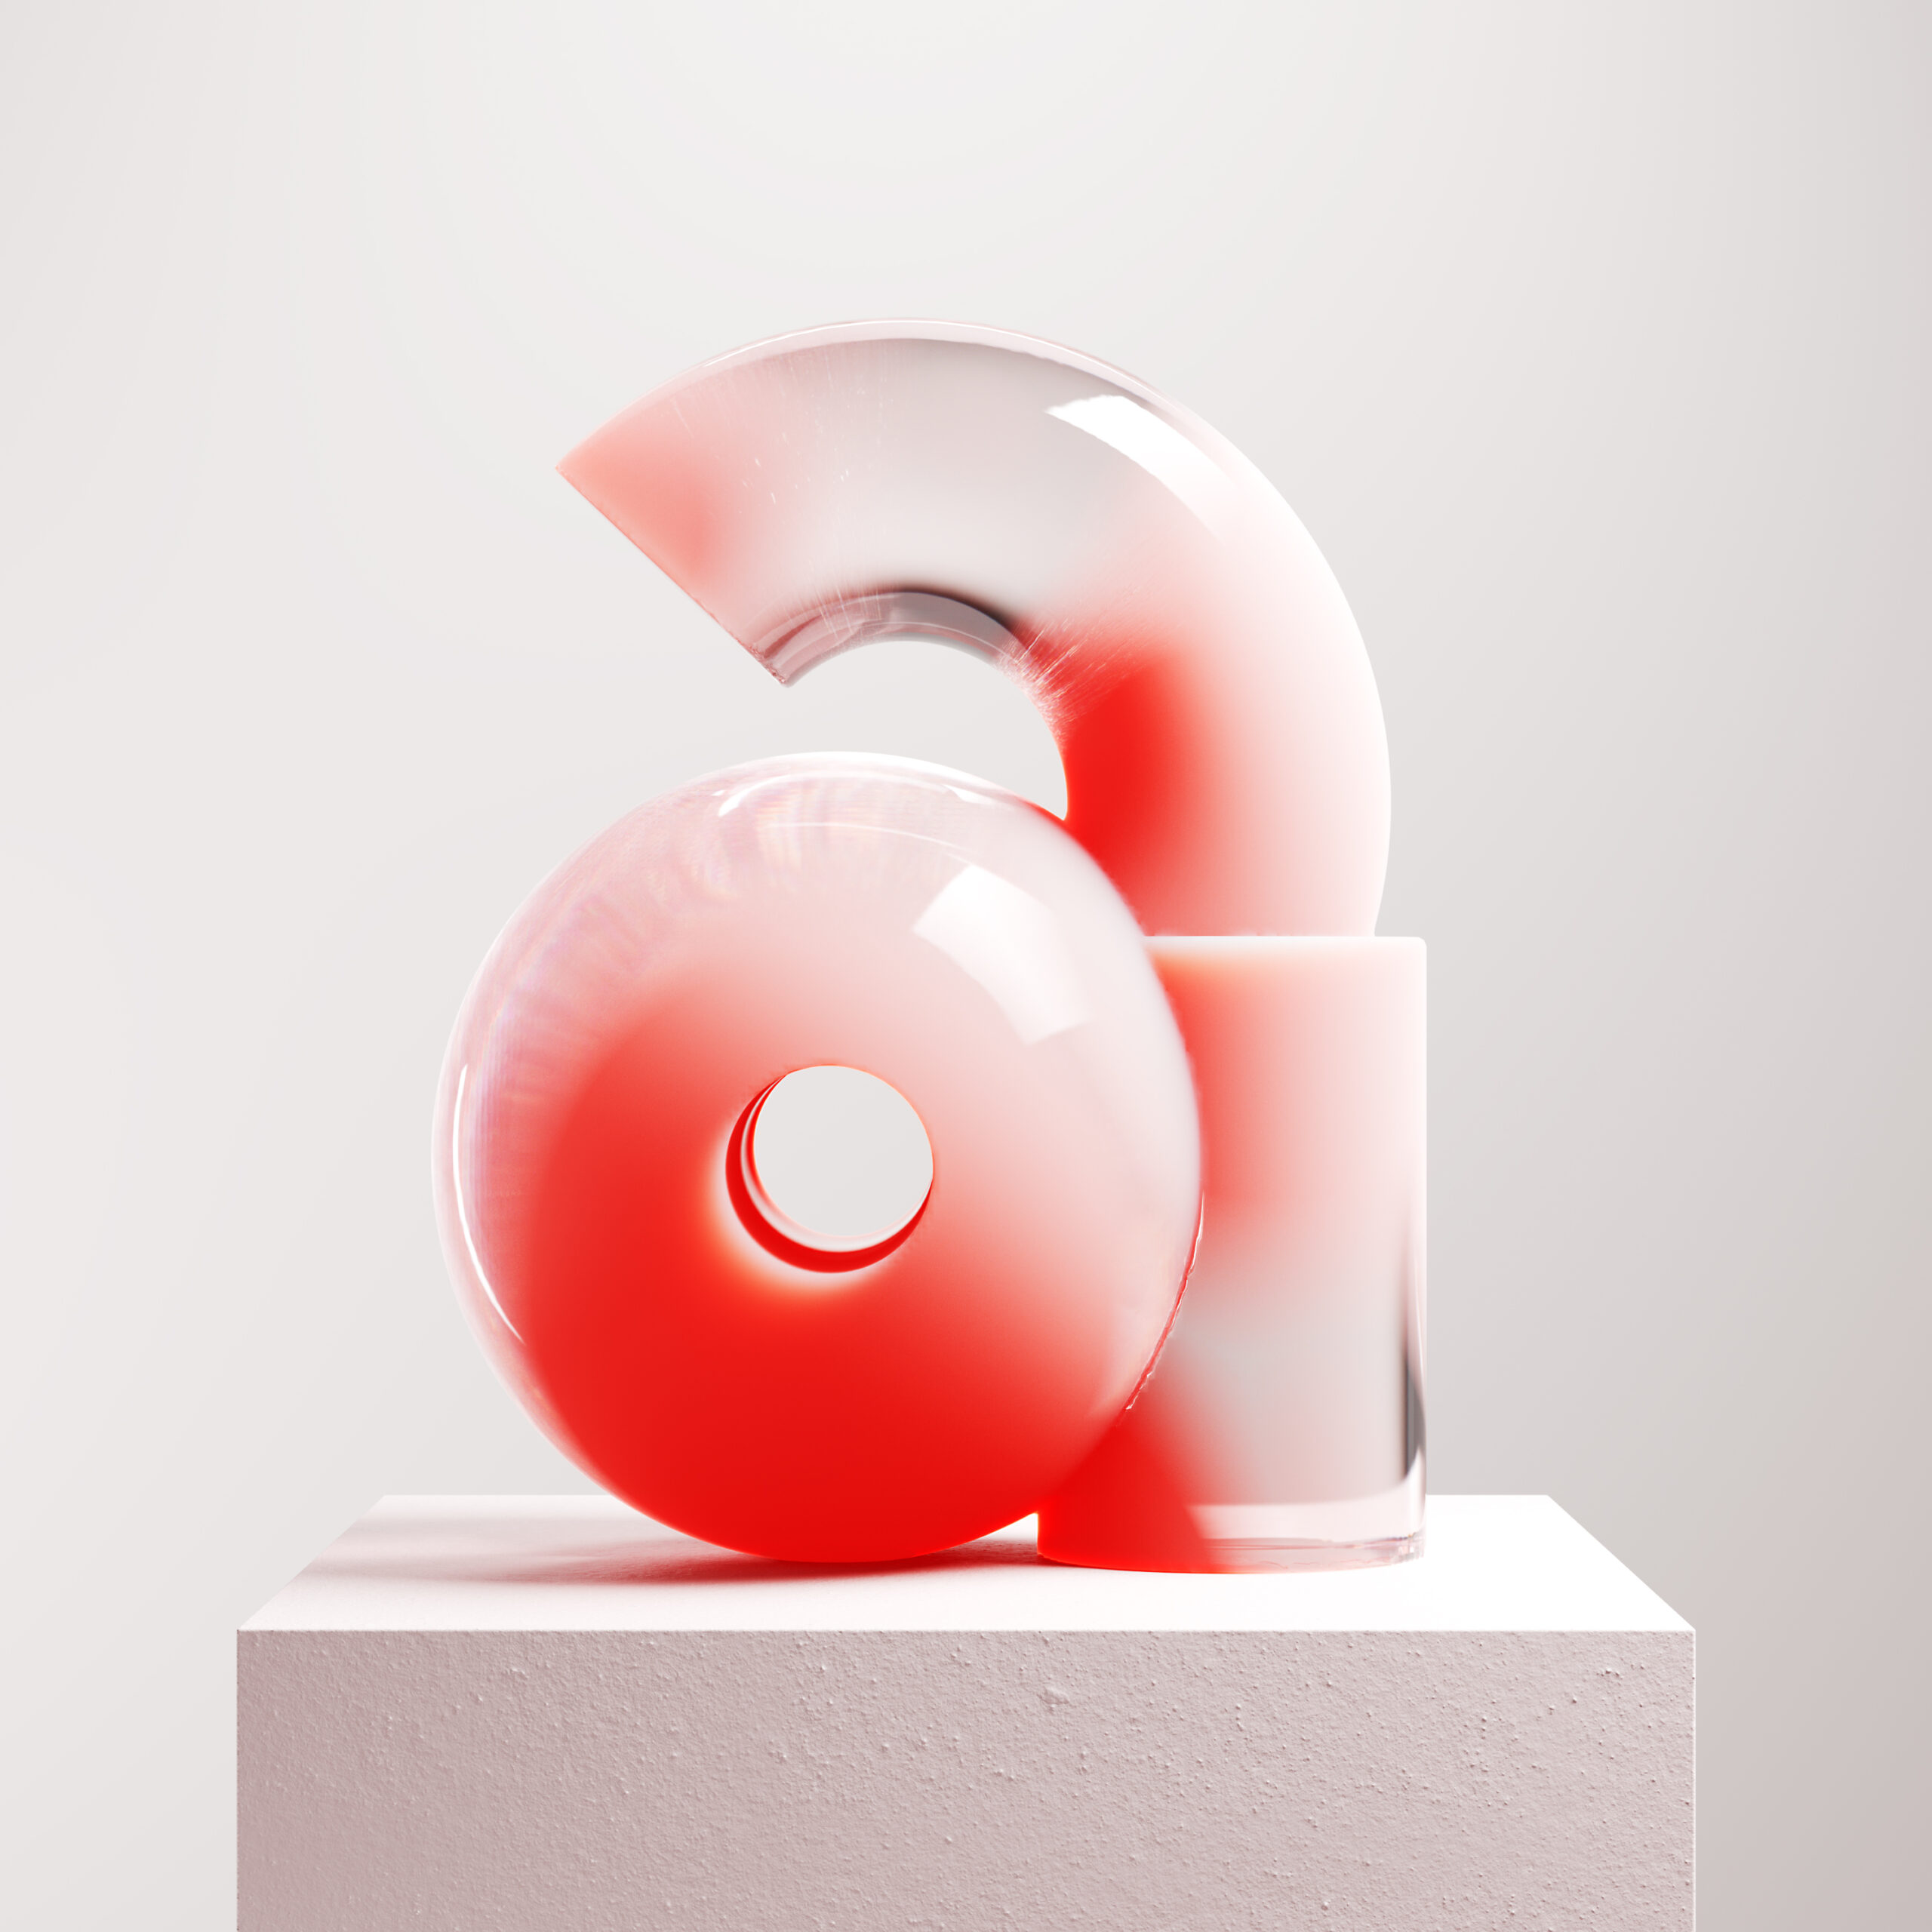 3D rendering of the letter A by Marco Bach